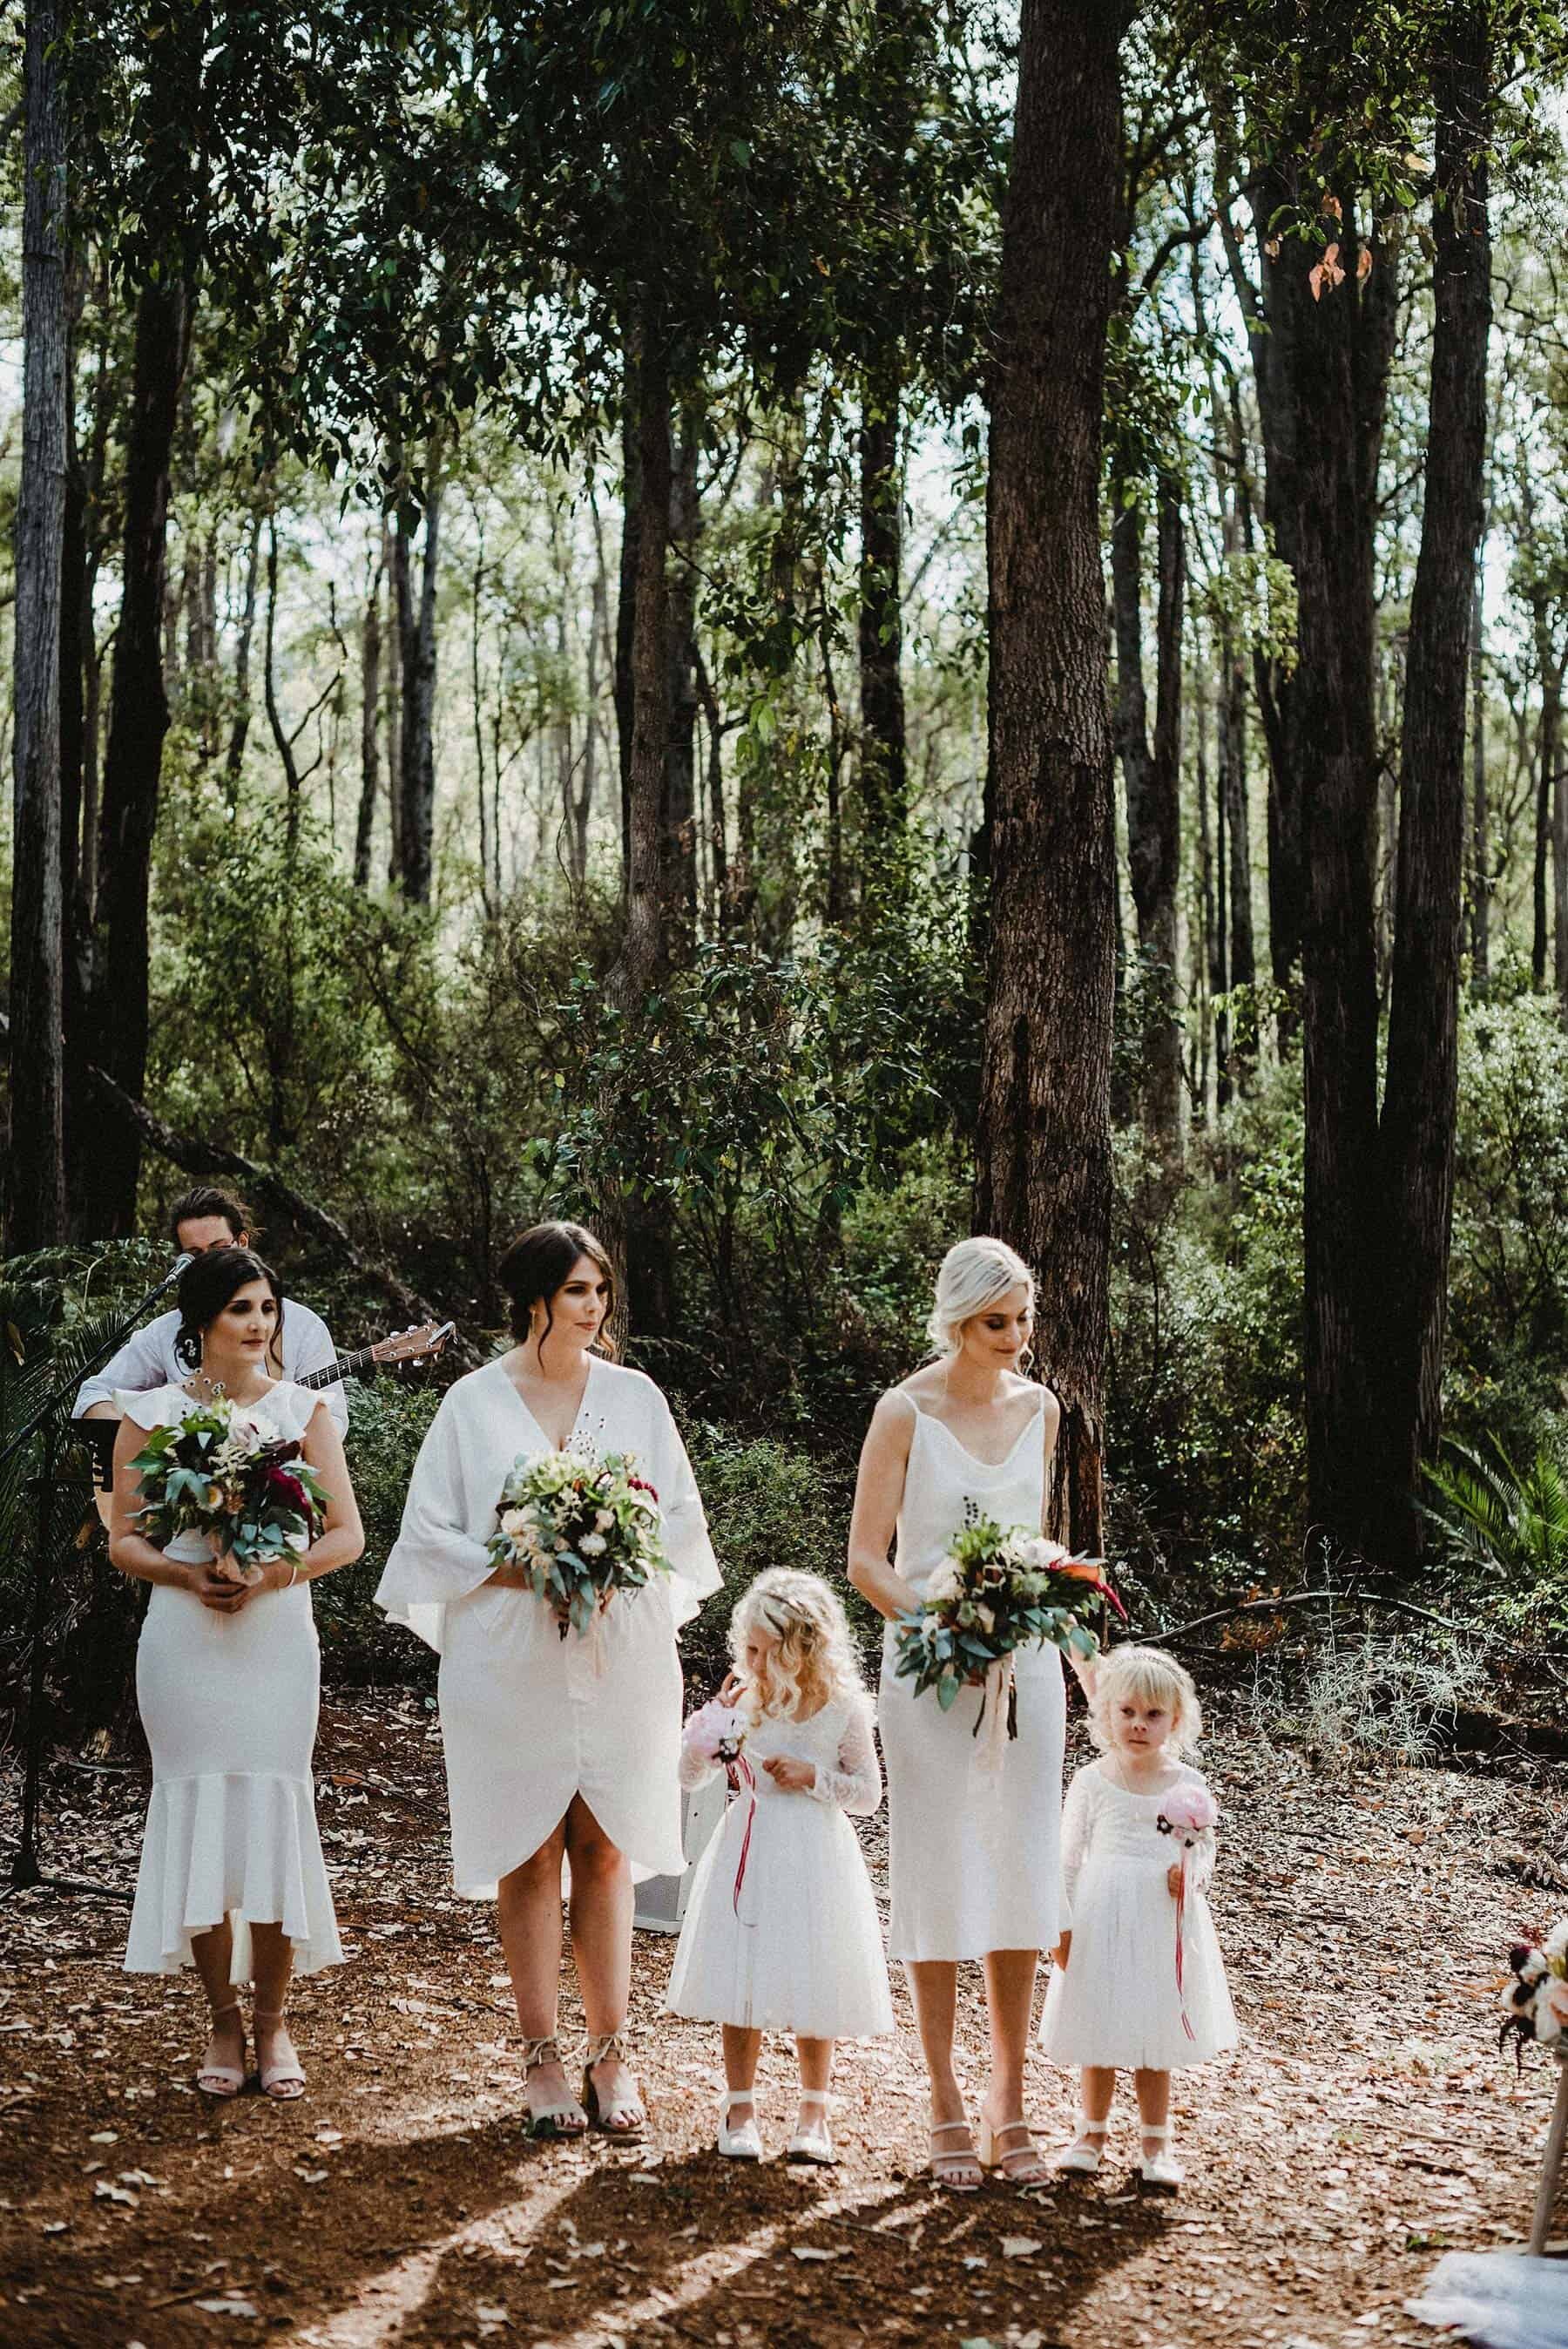 Bridesmaids and flower girls in rustic forest wedding